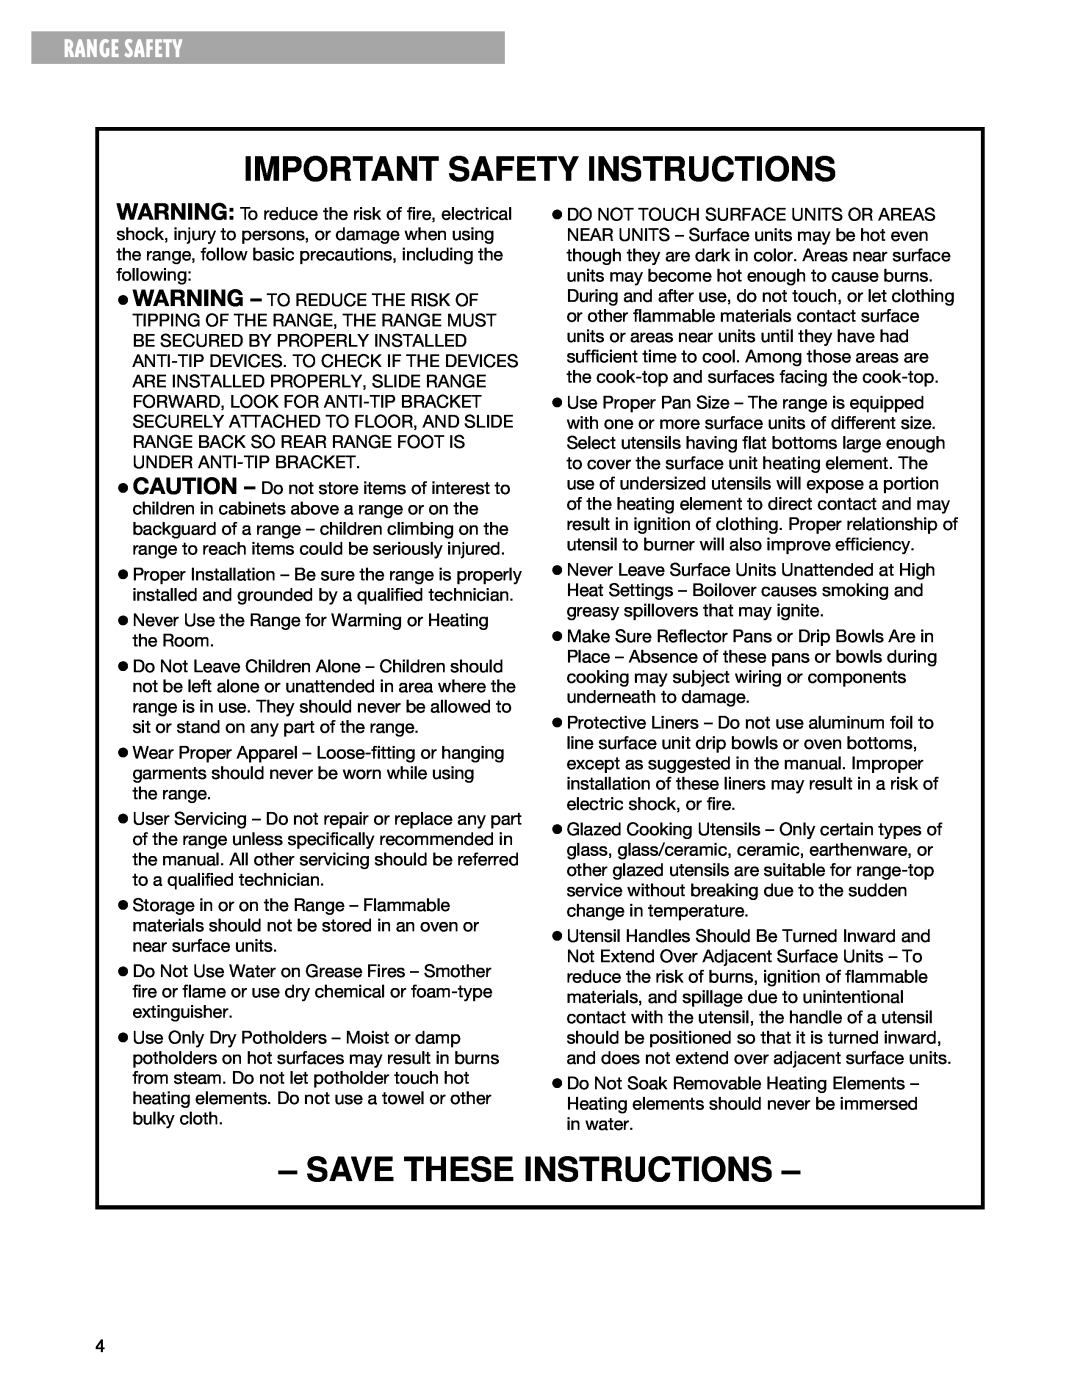 Whirlpool TES325G warranty Important Safety Instructions, Save These Instructions, Range Safety 